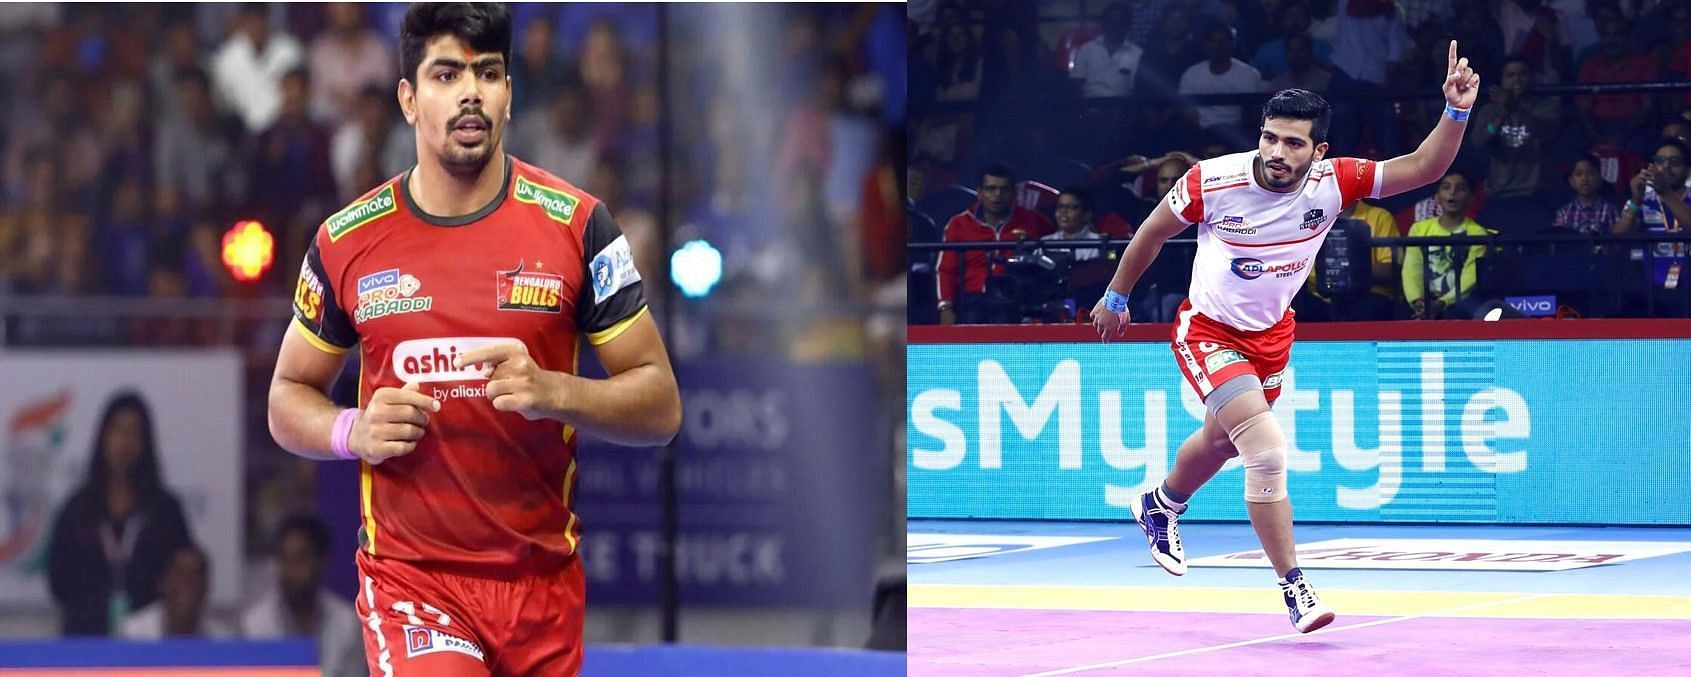 Pawan Sehrawat (left) and Vikash Kandola (right) were the highest earners on Day 1 of the Pro Kabaddi League 2022 Auctions